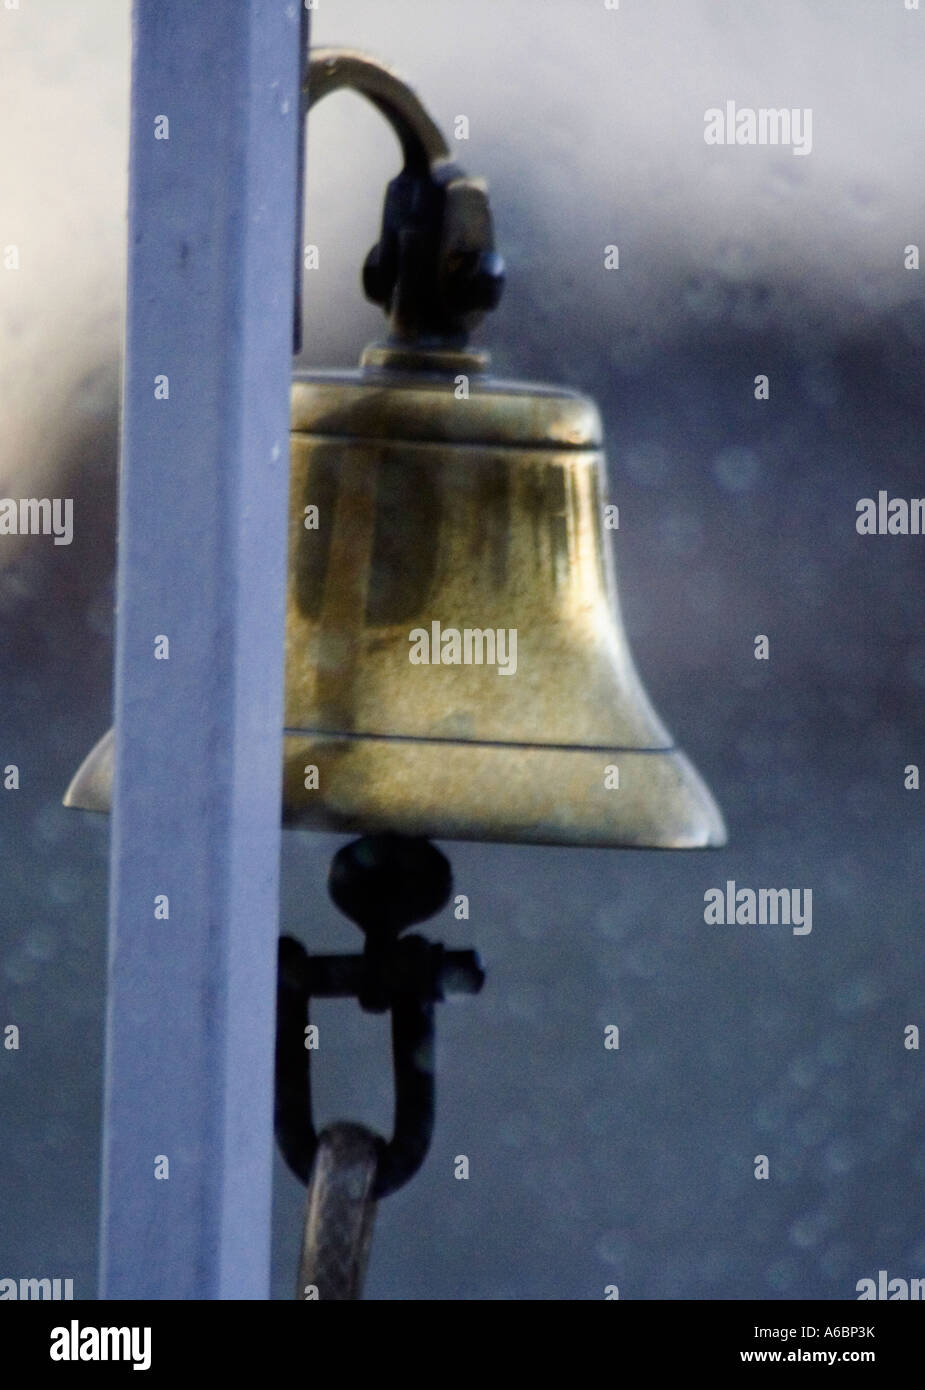 SHIP'S BELL. The bell of a Thames cruise ship, taken in stormy weather, through a window from inside the lower  deck. Stock Photo